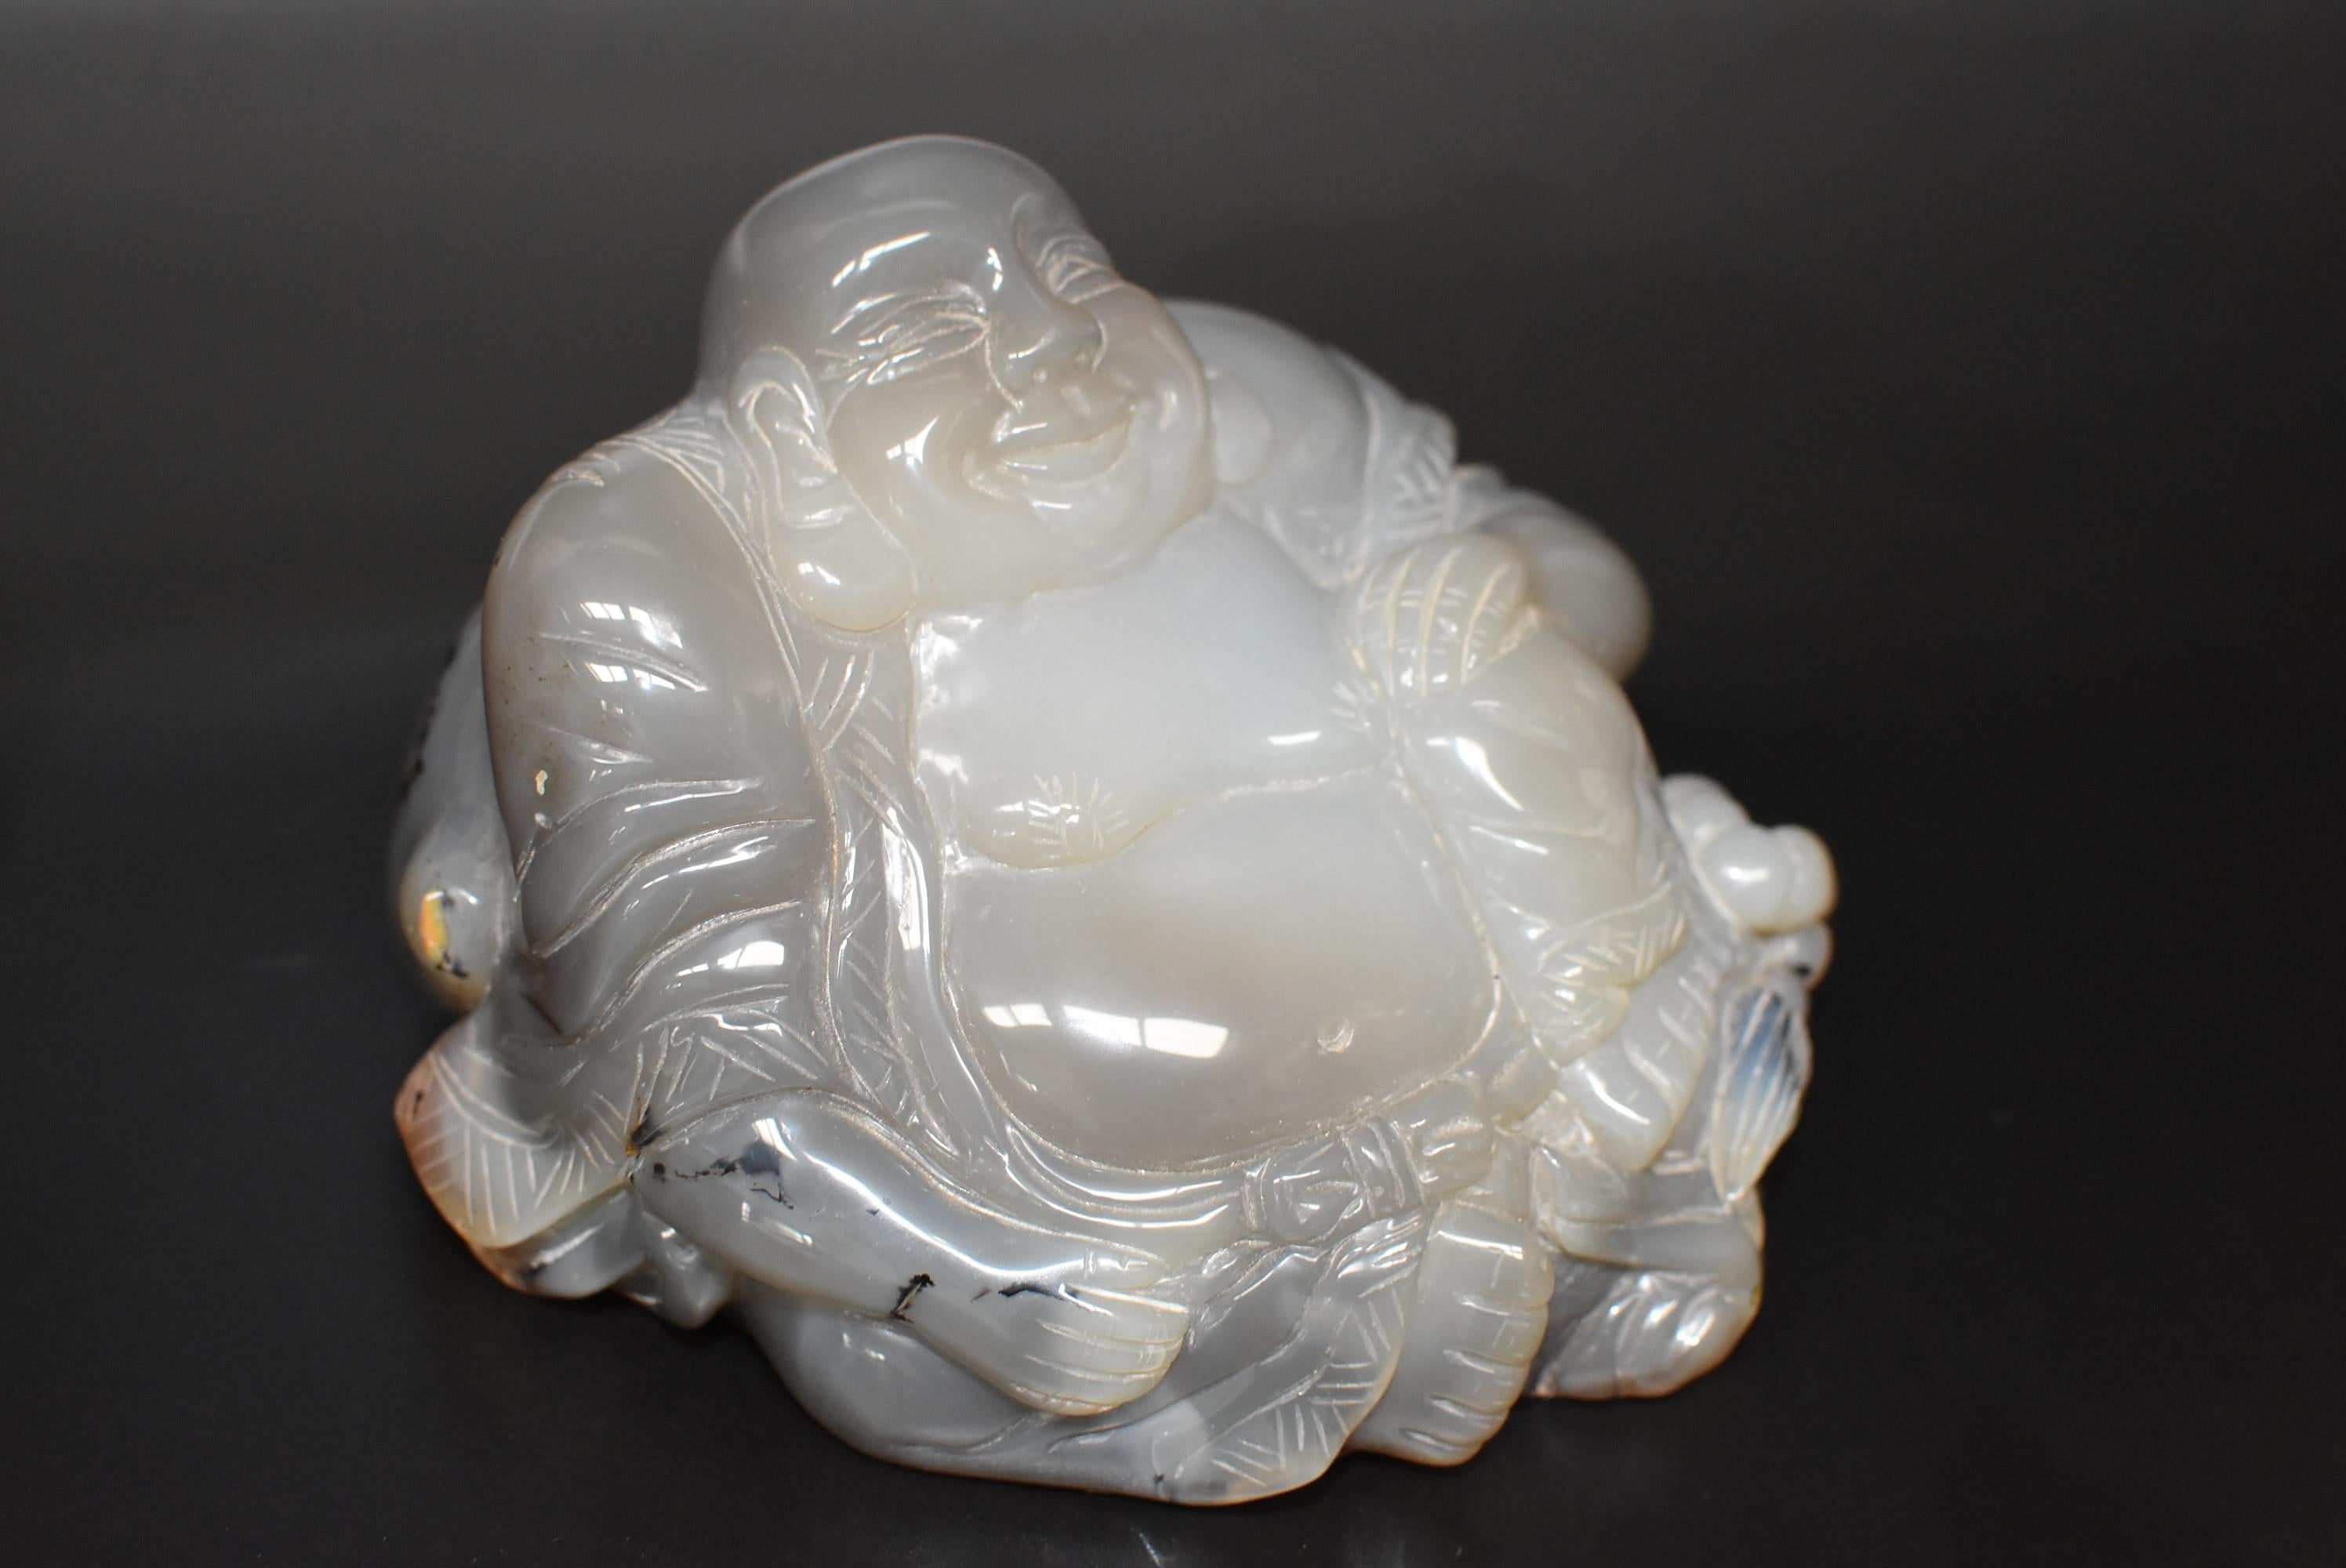 A hand-carved, solid agate Buddha. He is depicted sitting with his robe open, cinched with a bow under his belly, an expression for great allowance. The happy Buddha is a beloved deity that is believed to bring happiness and peace. This is an